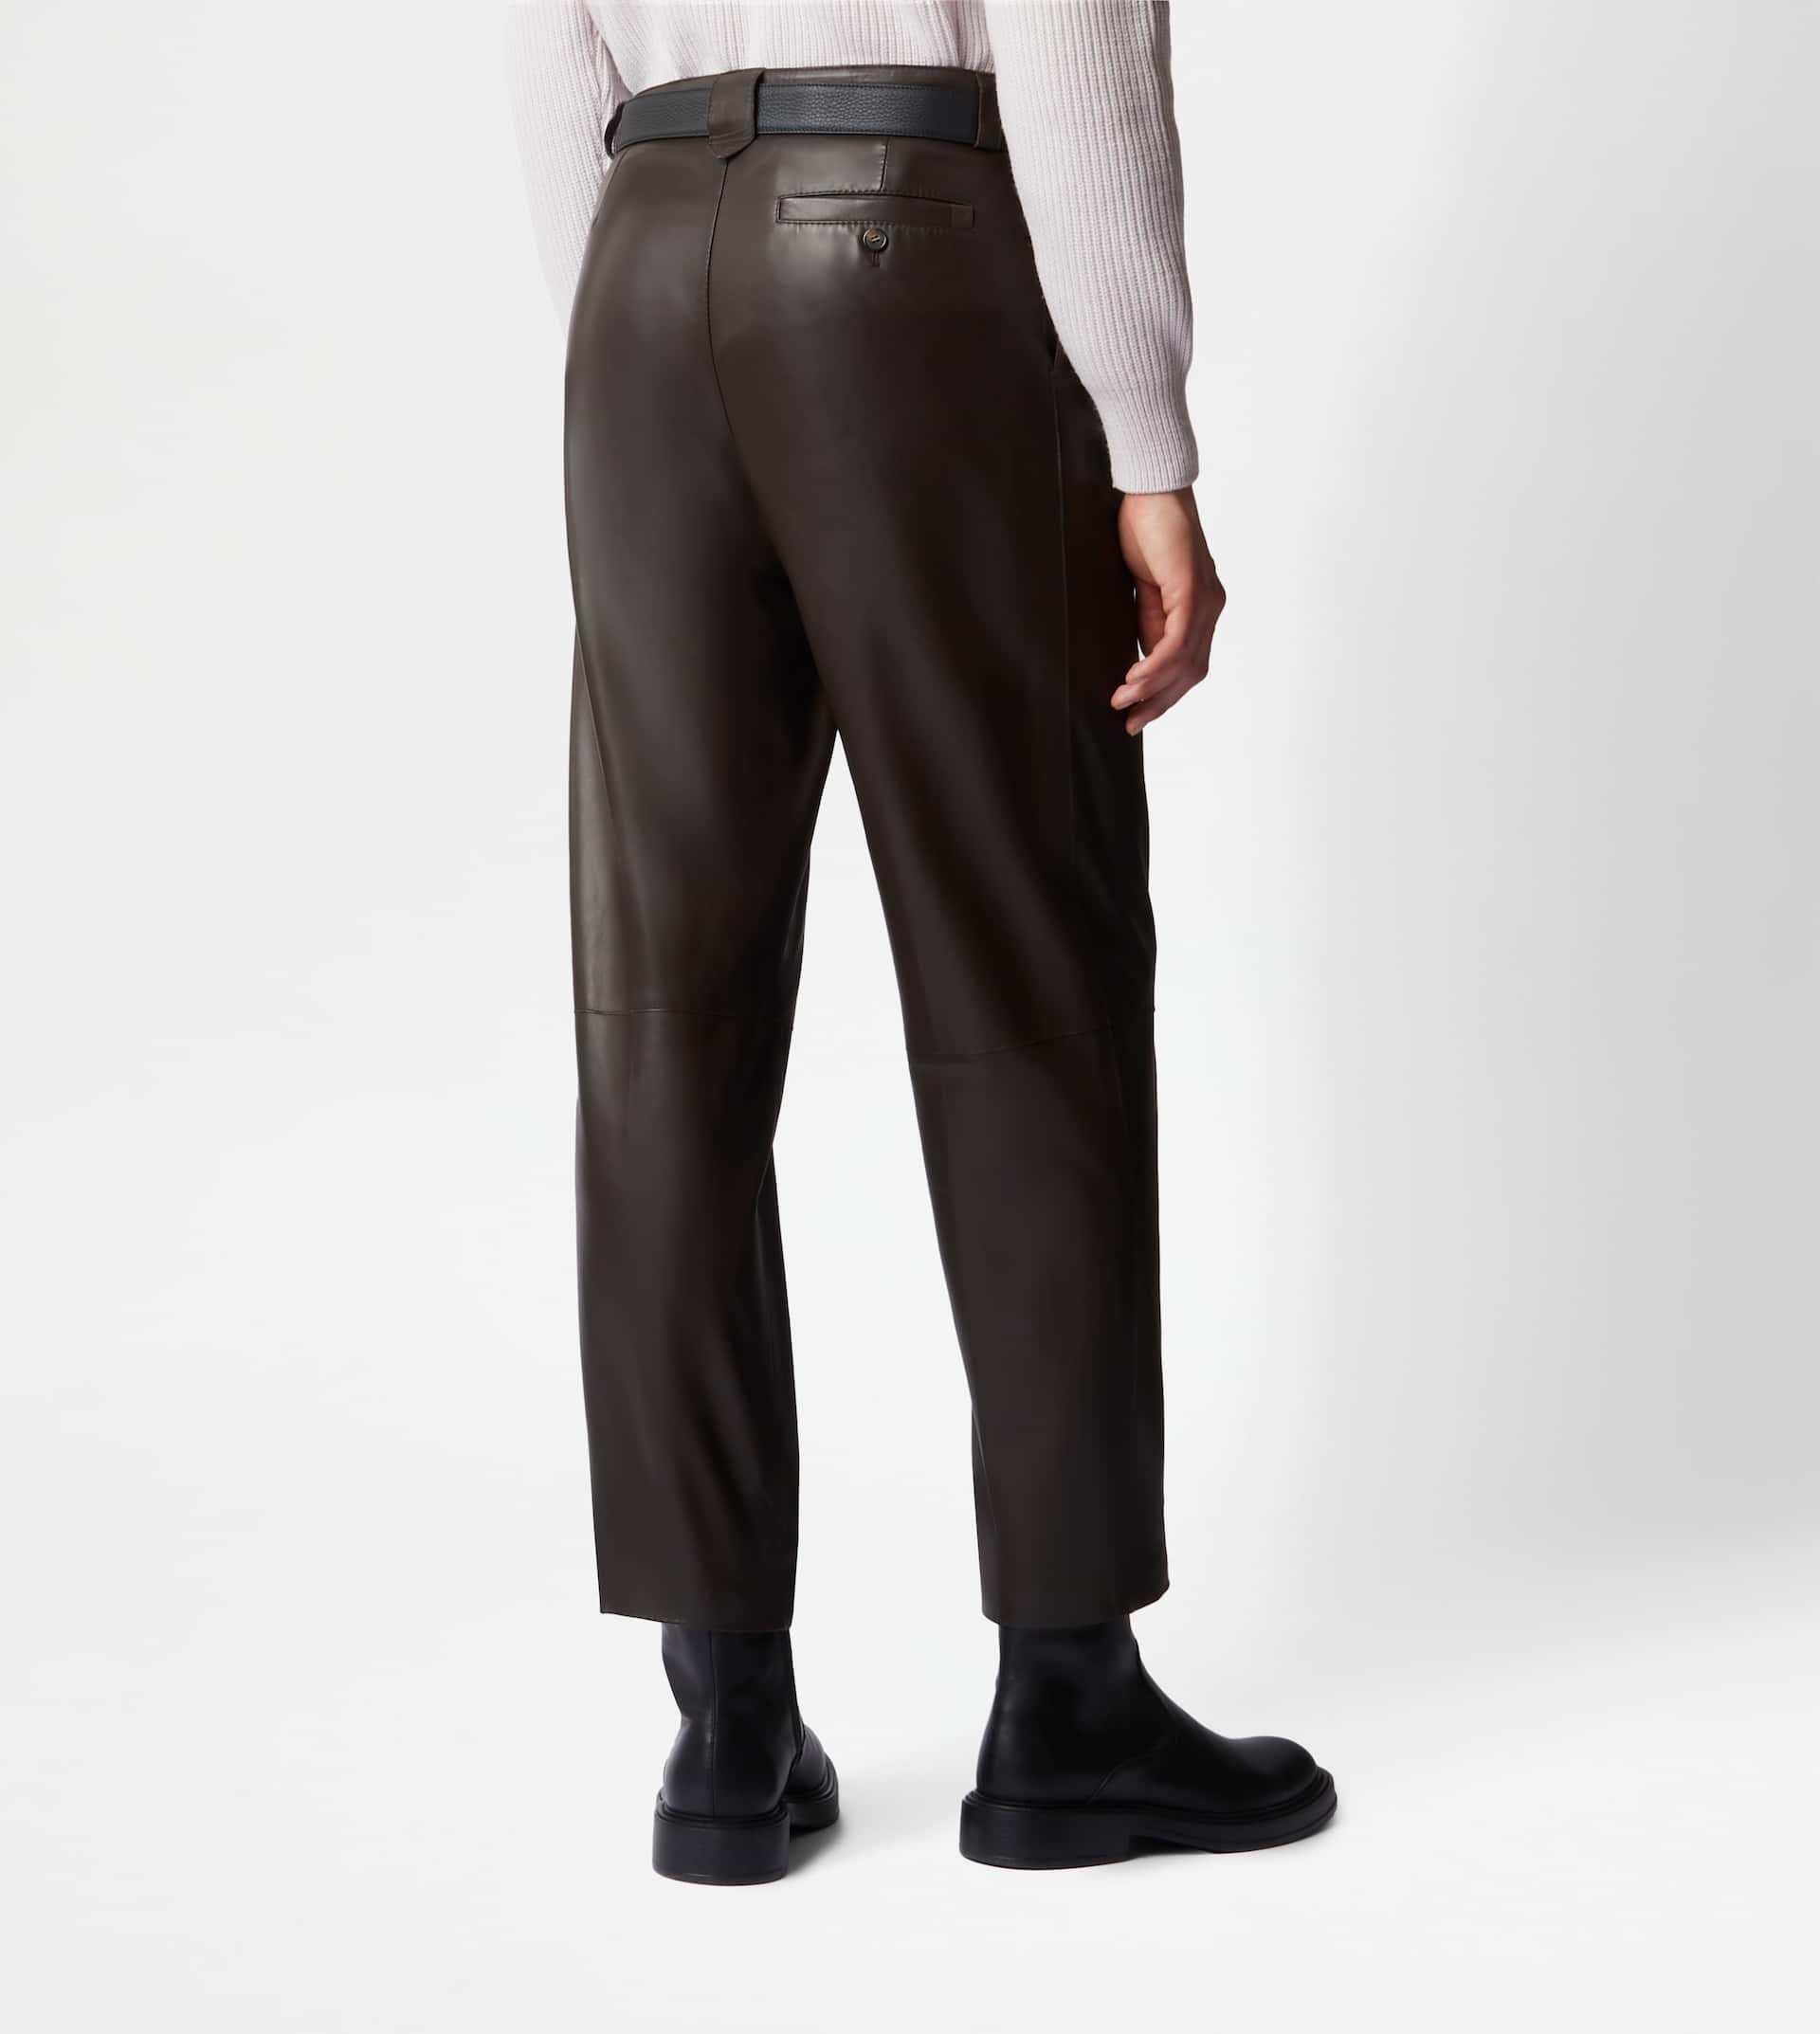 PANTS IN NAPPA LEATHER - BROWN - 7